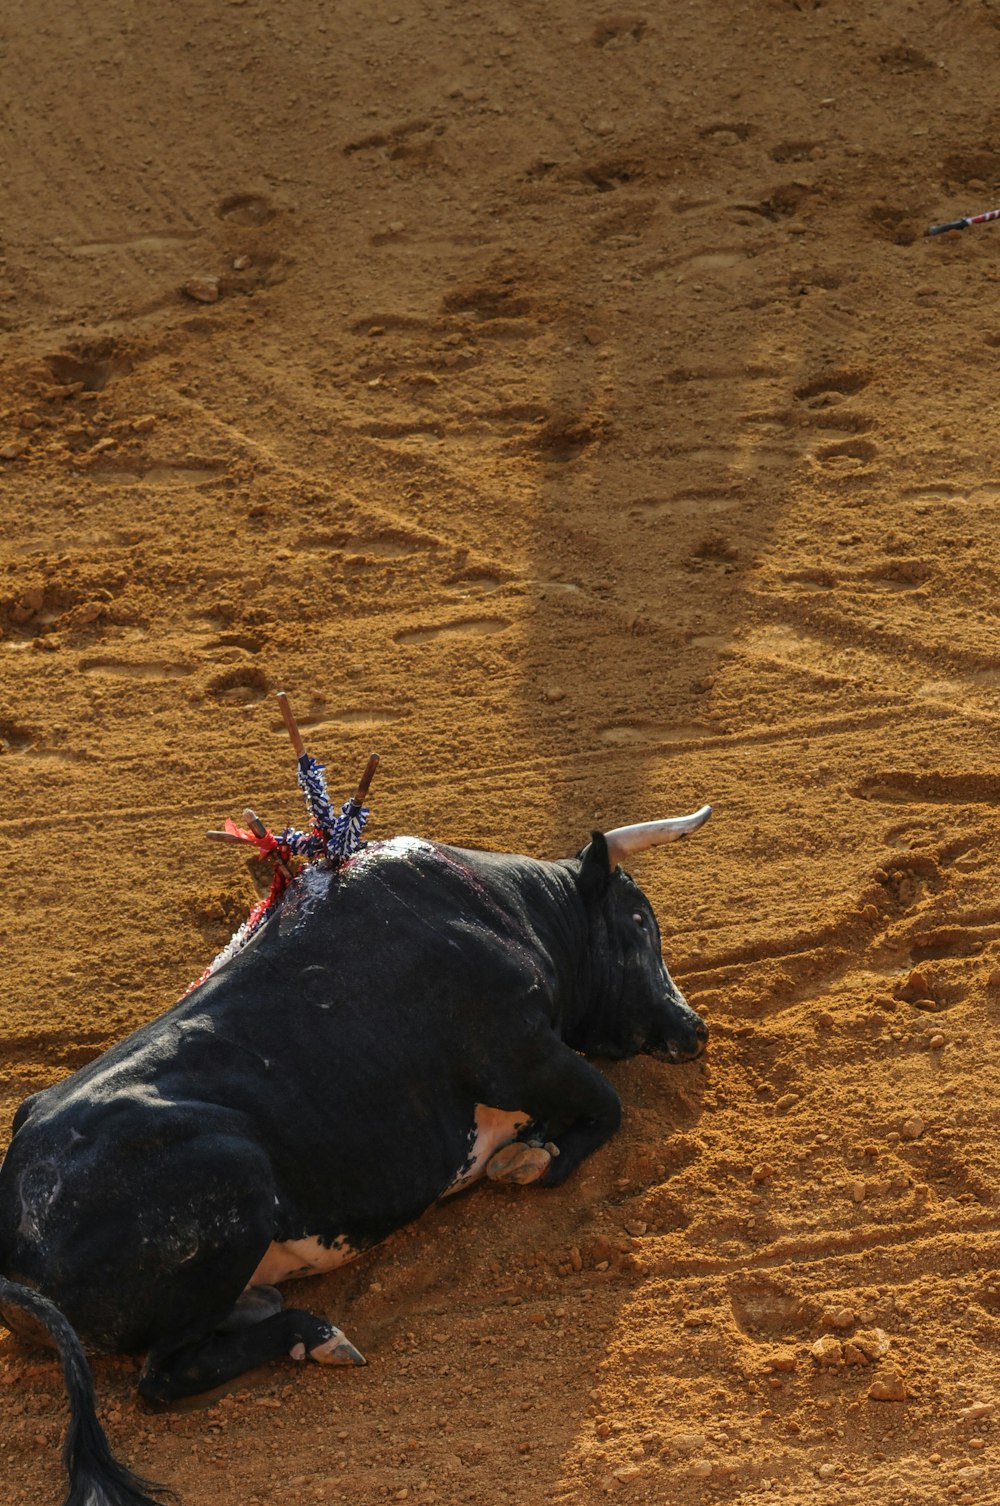 a bull laying on the ground in a dirt field